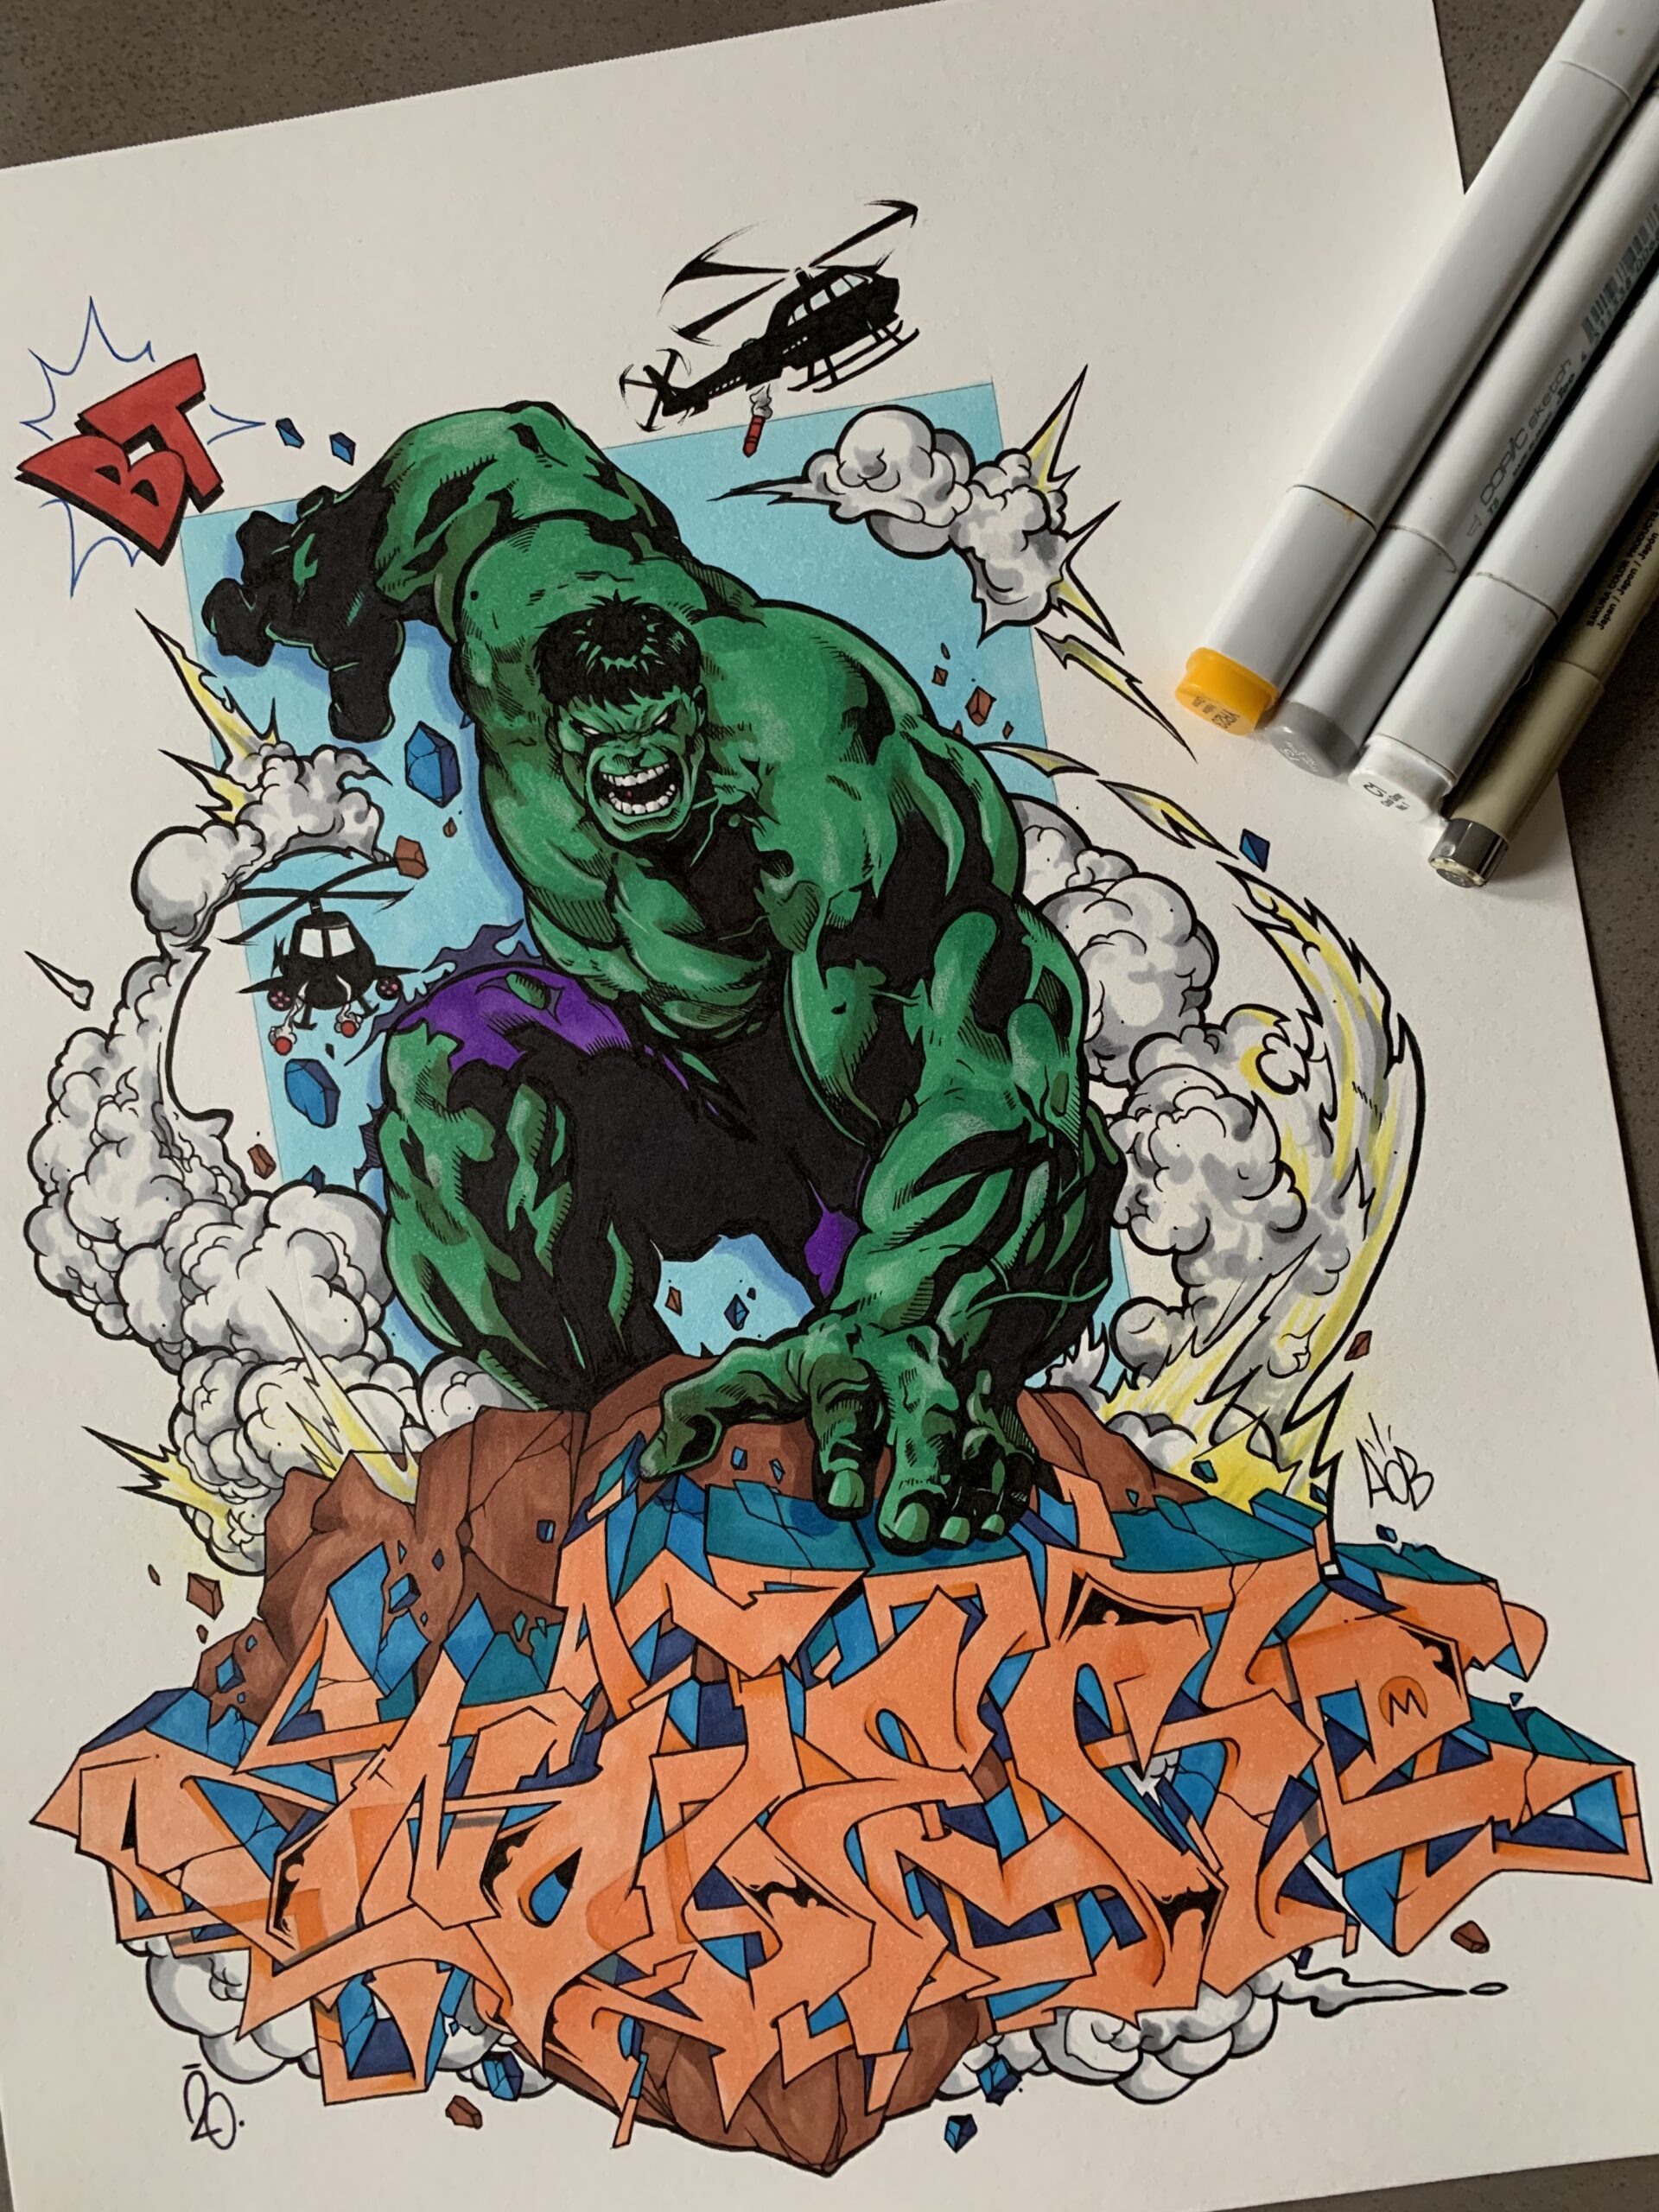 Hulk by Nover, on 11x14". Done with Markers & Pen, 2020.